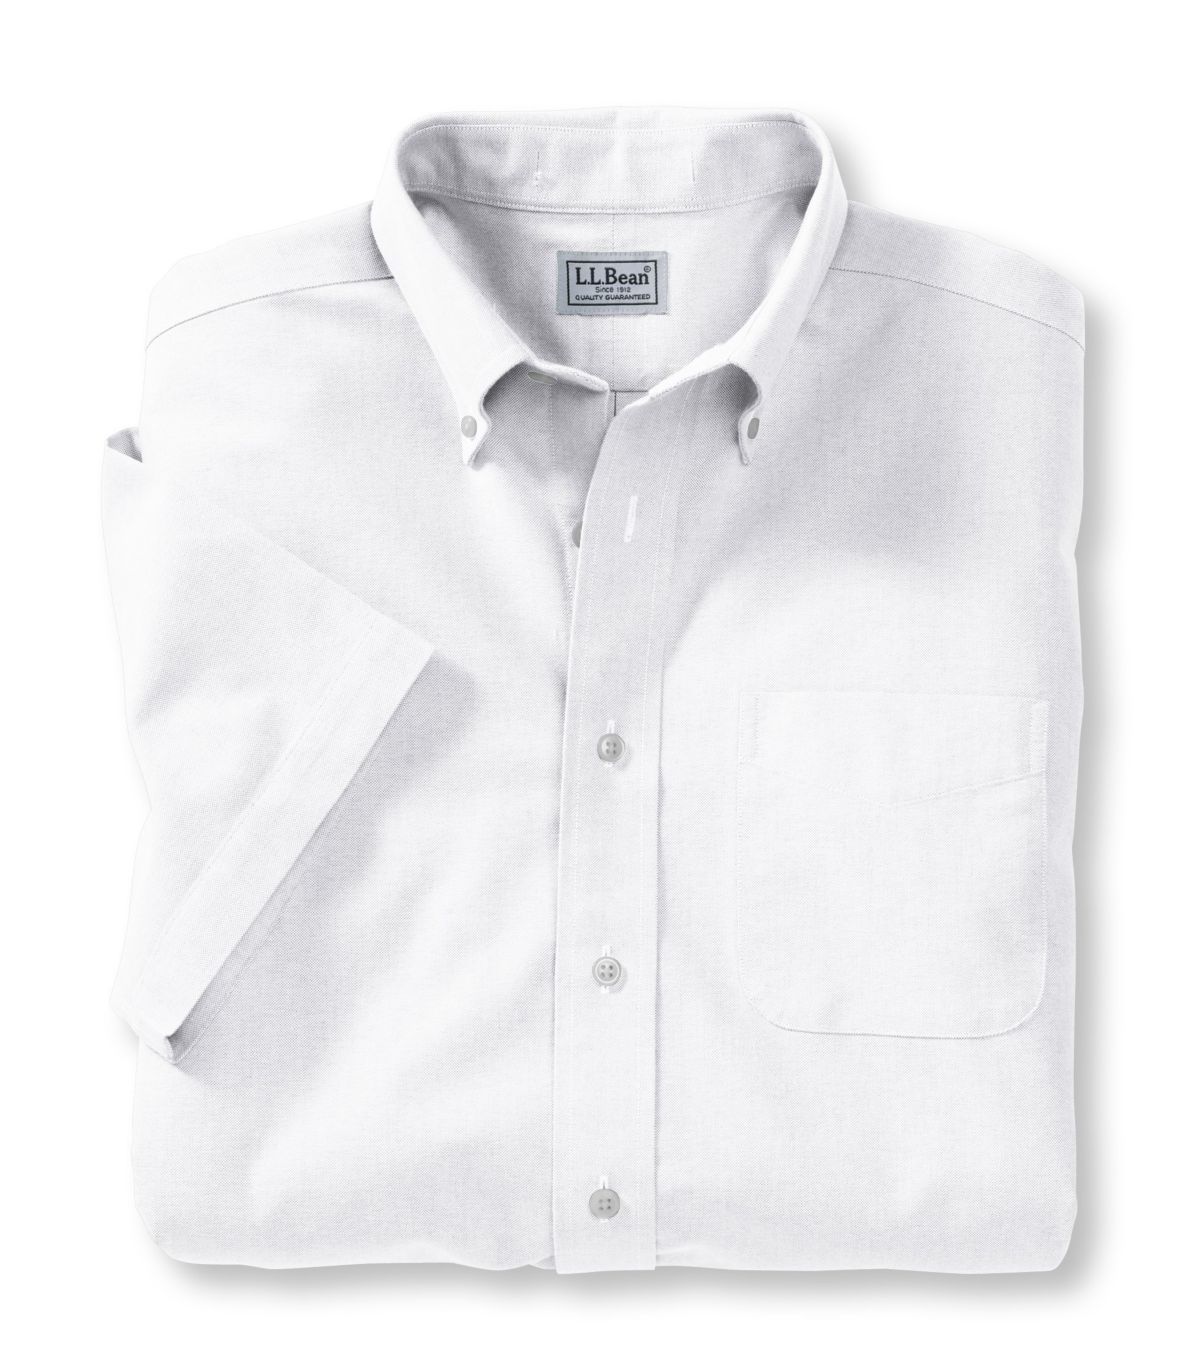 Men's Wrinkle-Free Classic Oxford Cloth Shirt, Traditional Fit Short-Sleeve